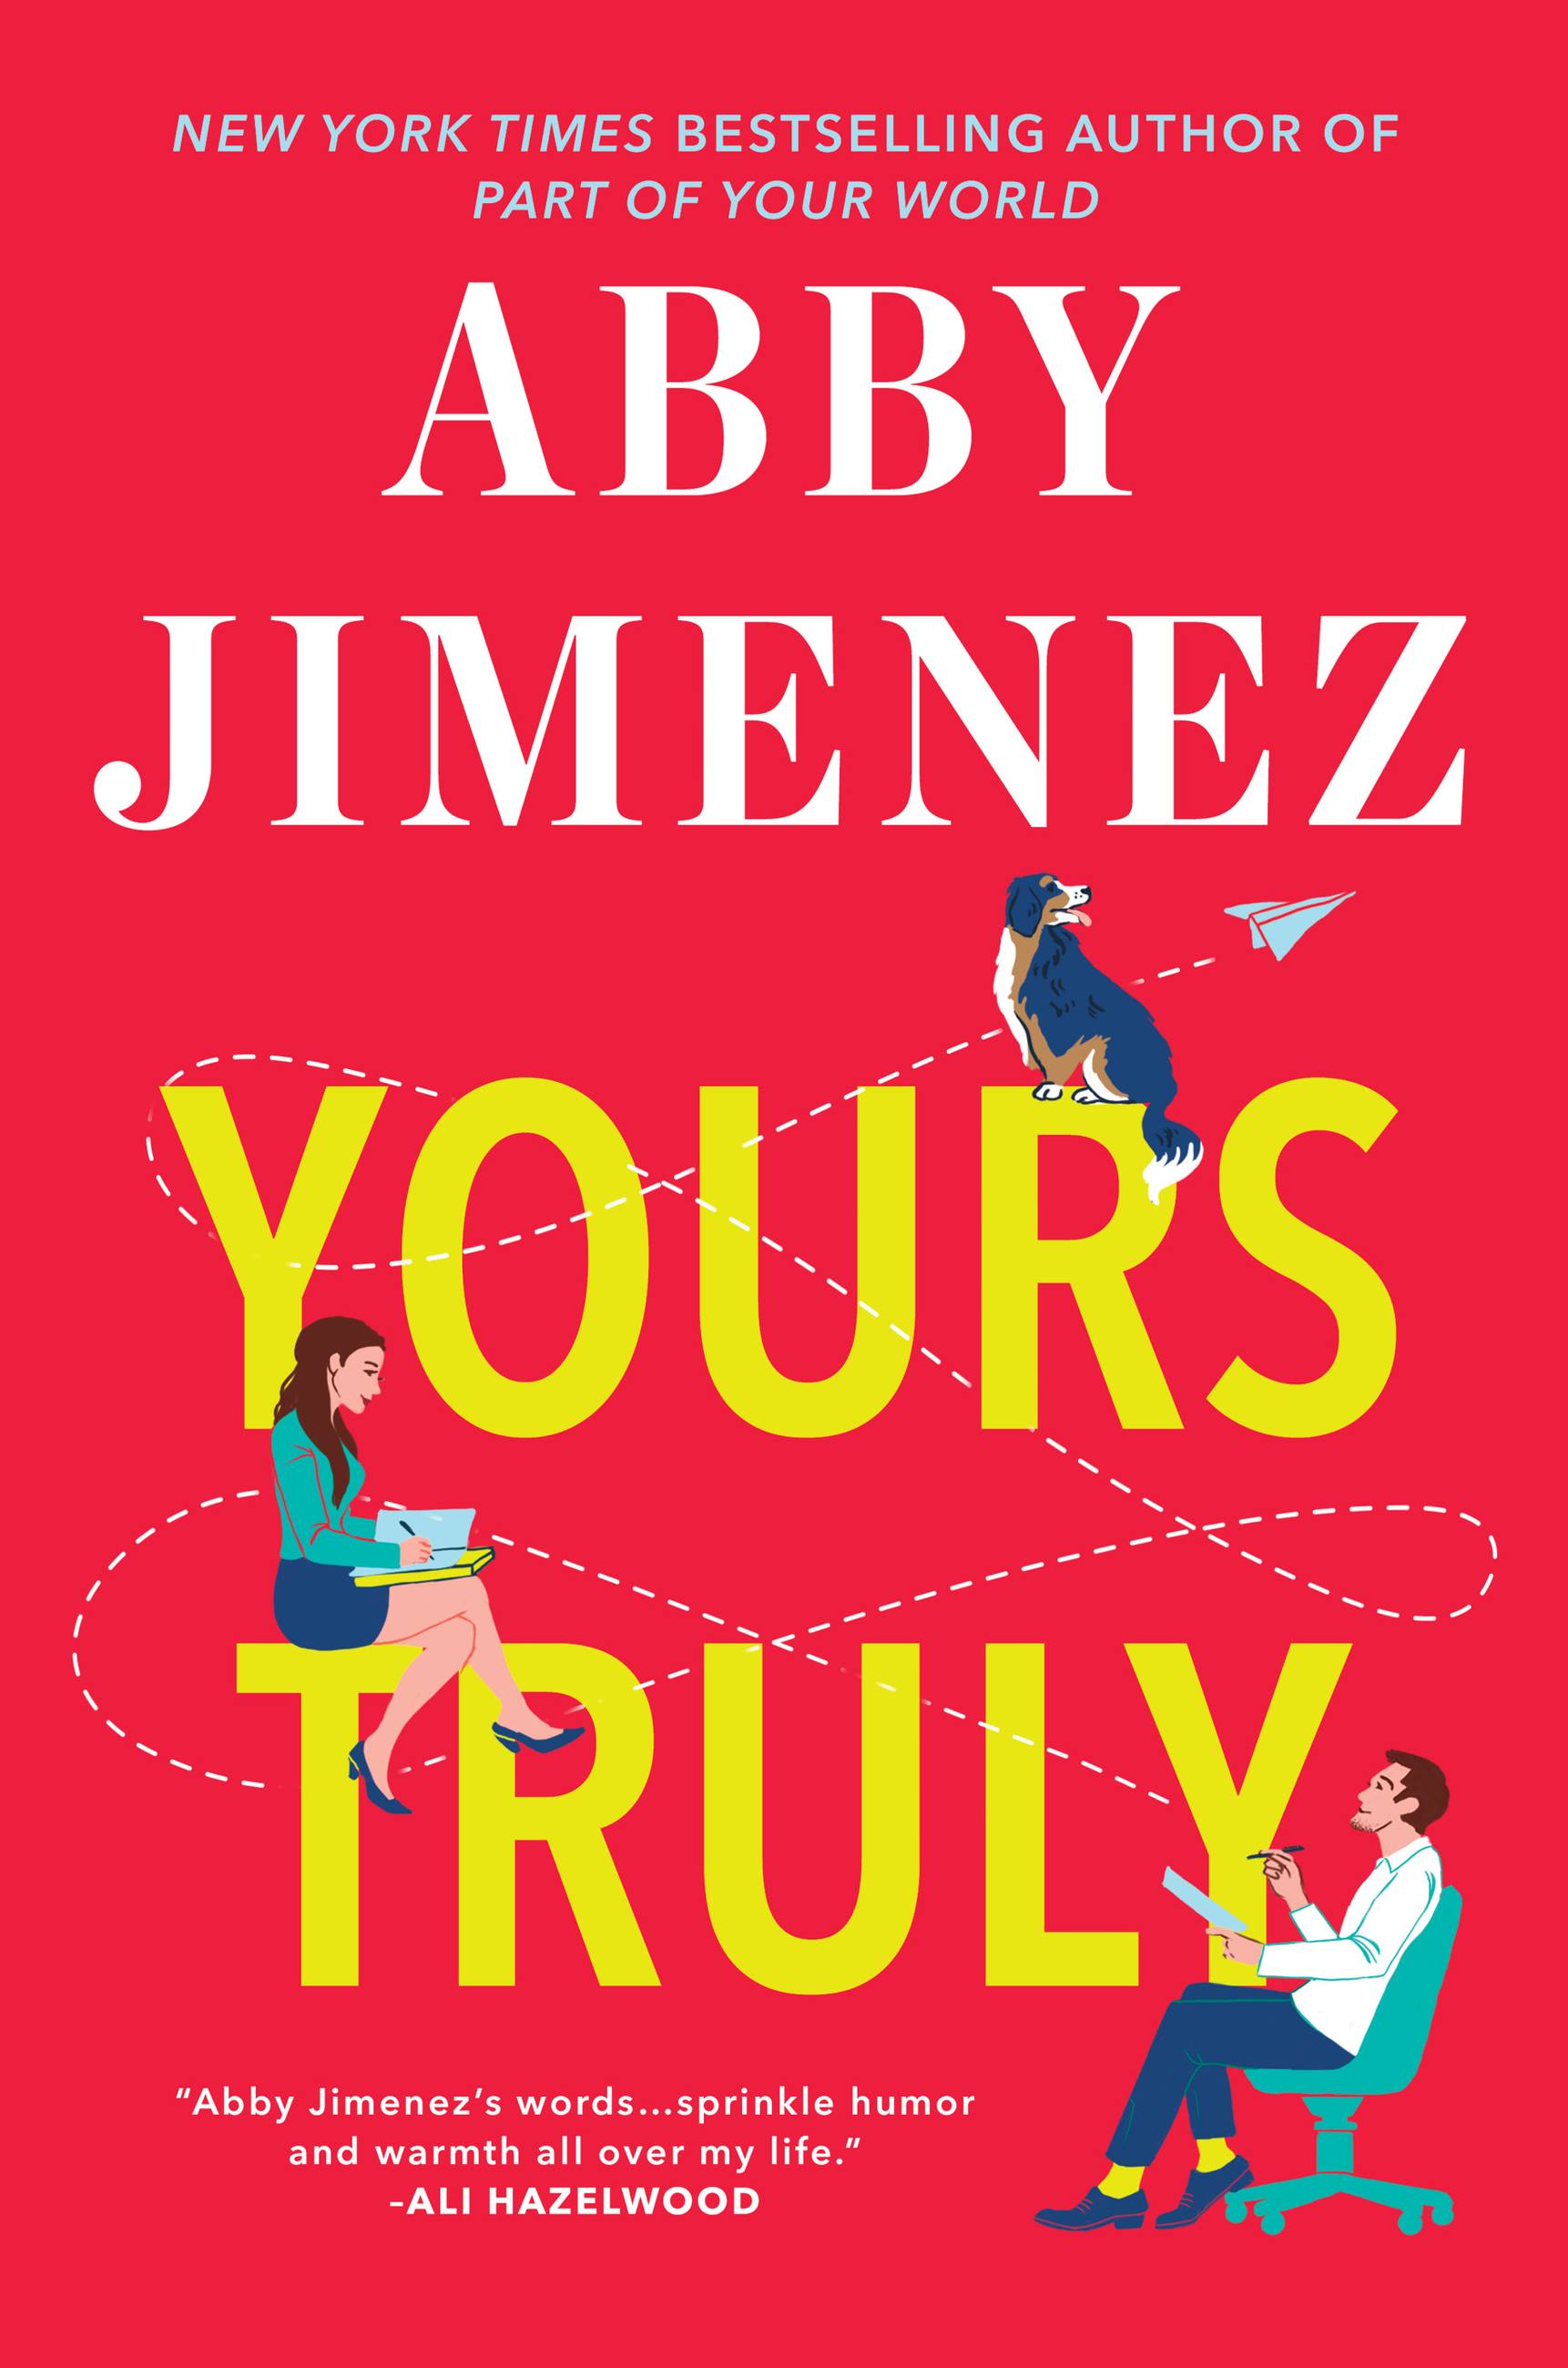 Jimenez　Group　Yours　Book　Truly　by　Abby　Hachette